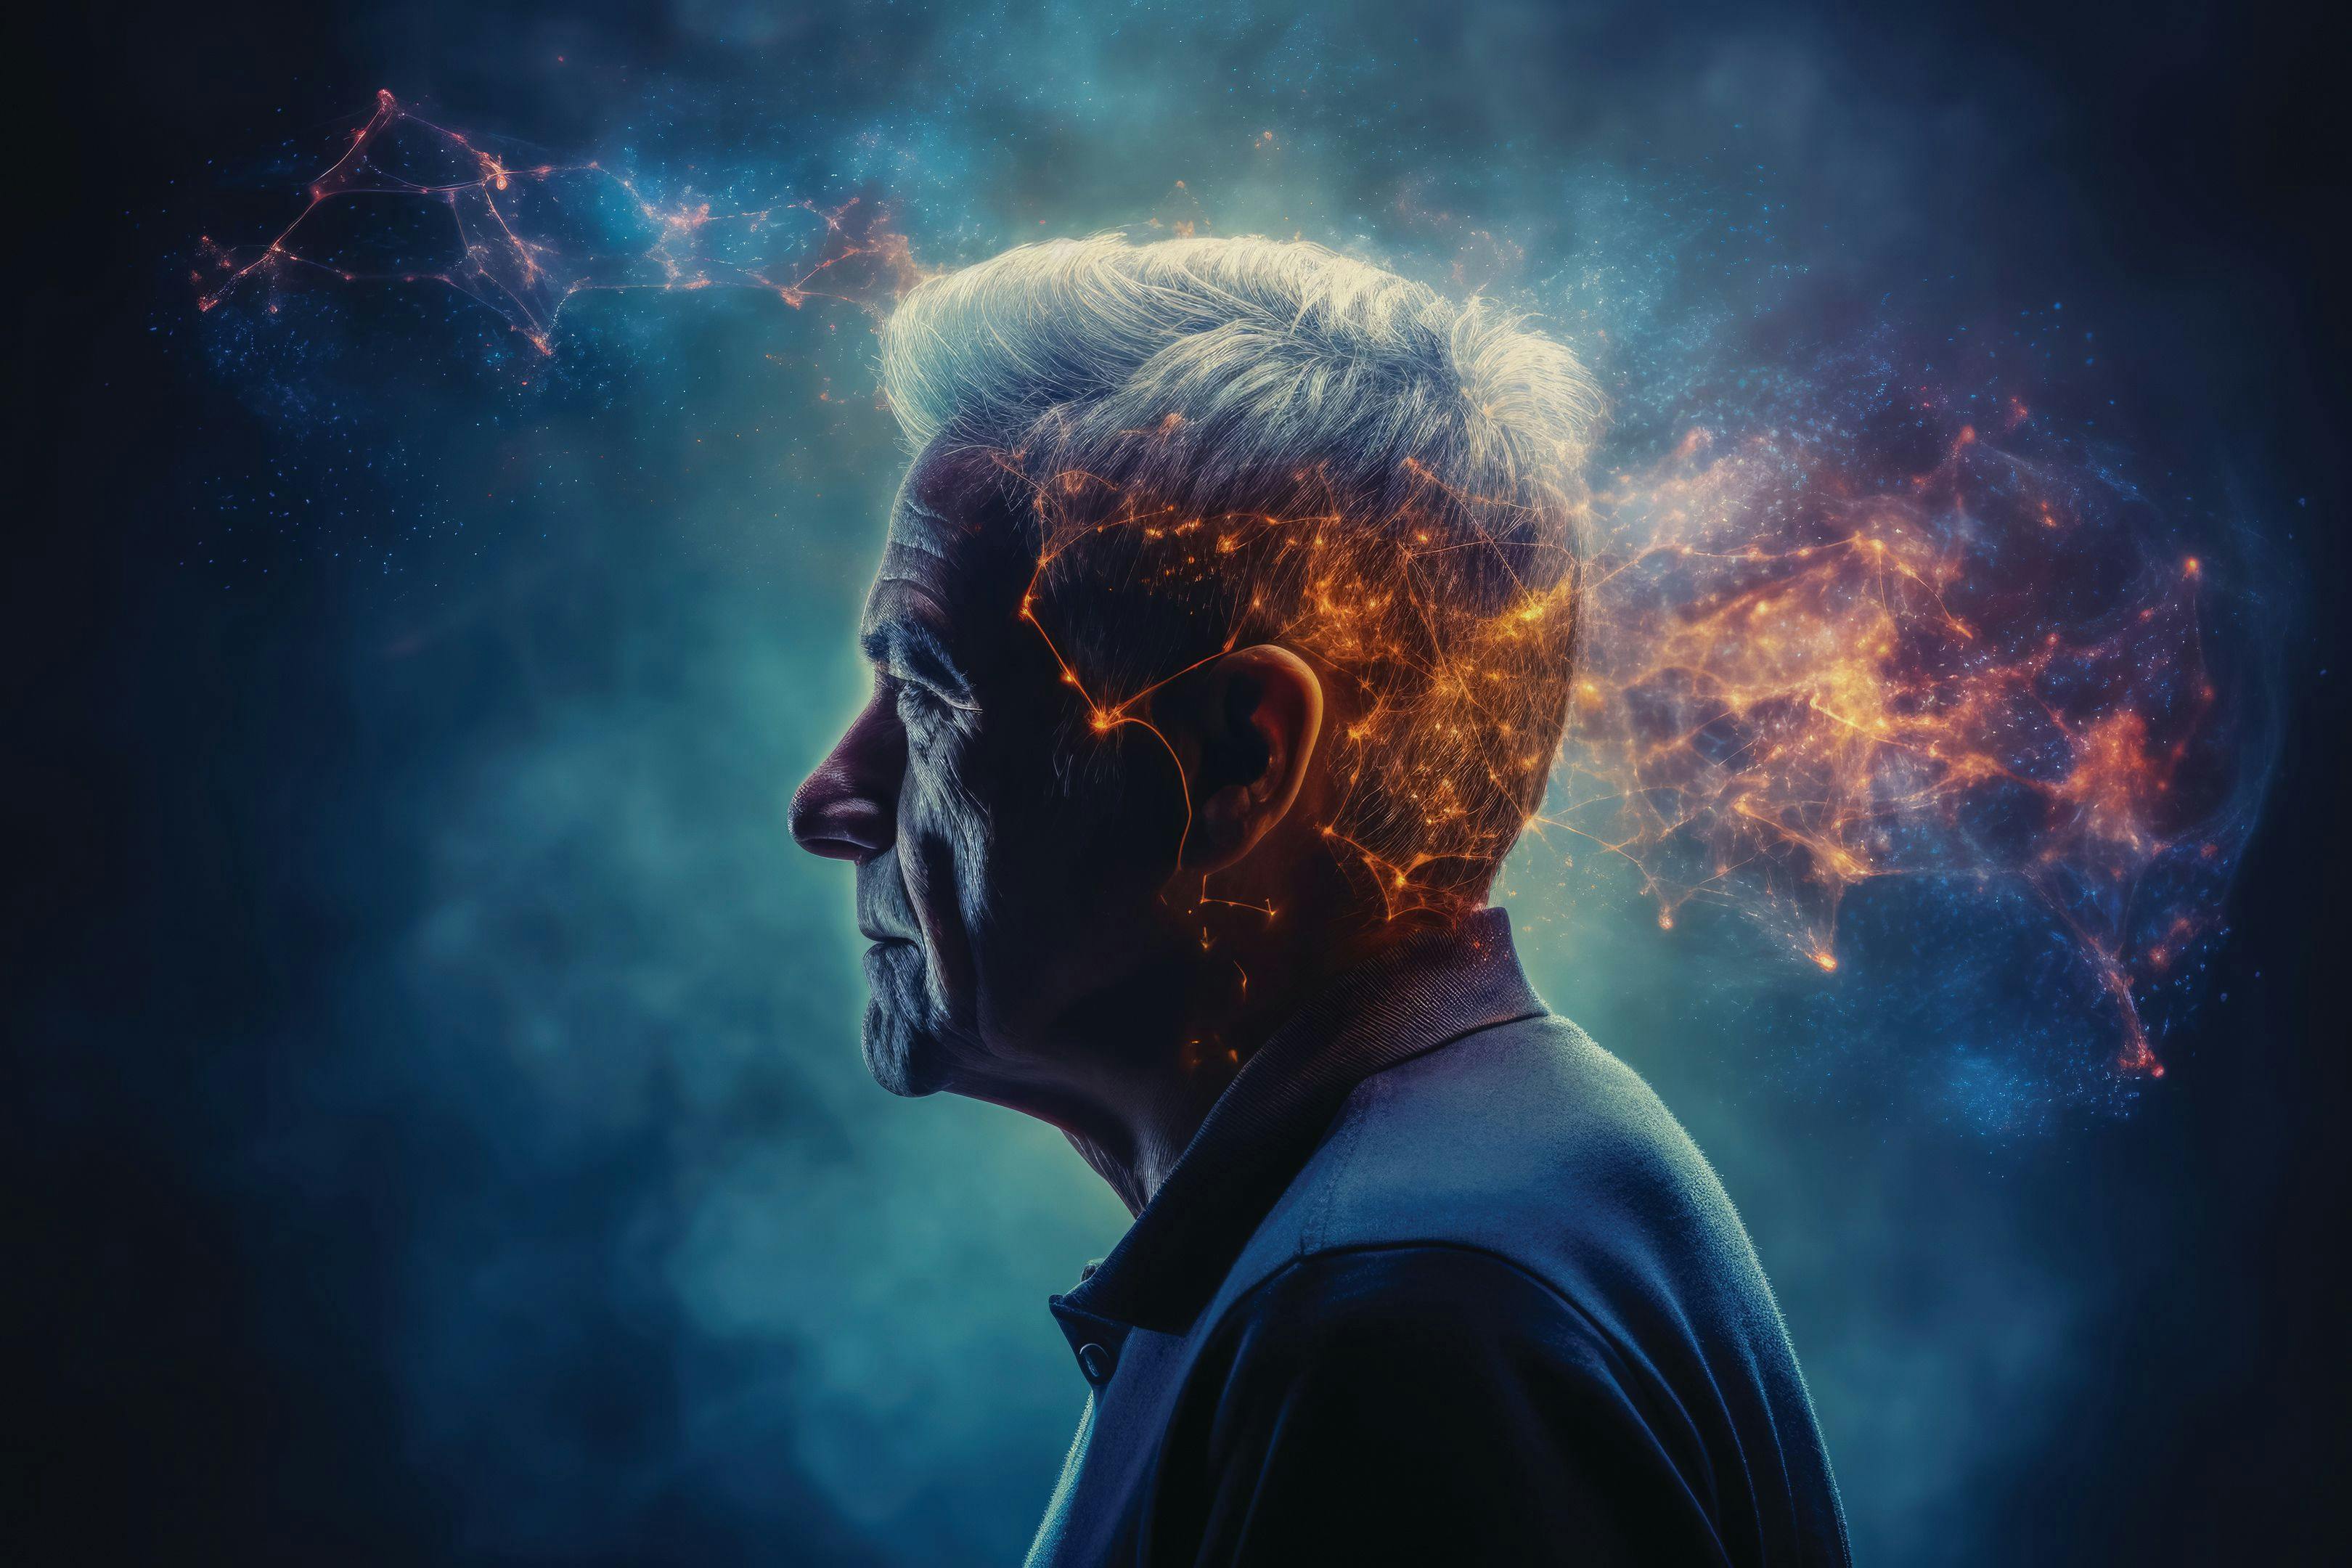 An illustration made with AI shows a man with digital imagery overlaid over his head. Image credit: ©fotogurmespb – stock.adobe.com